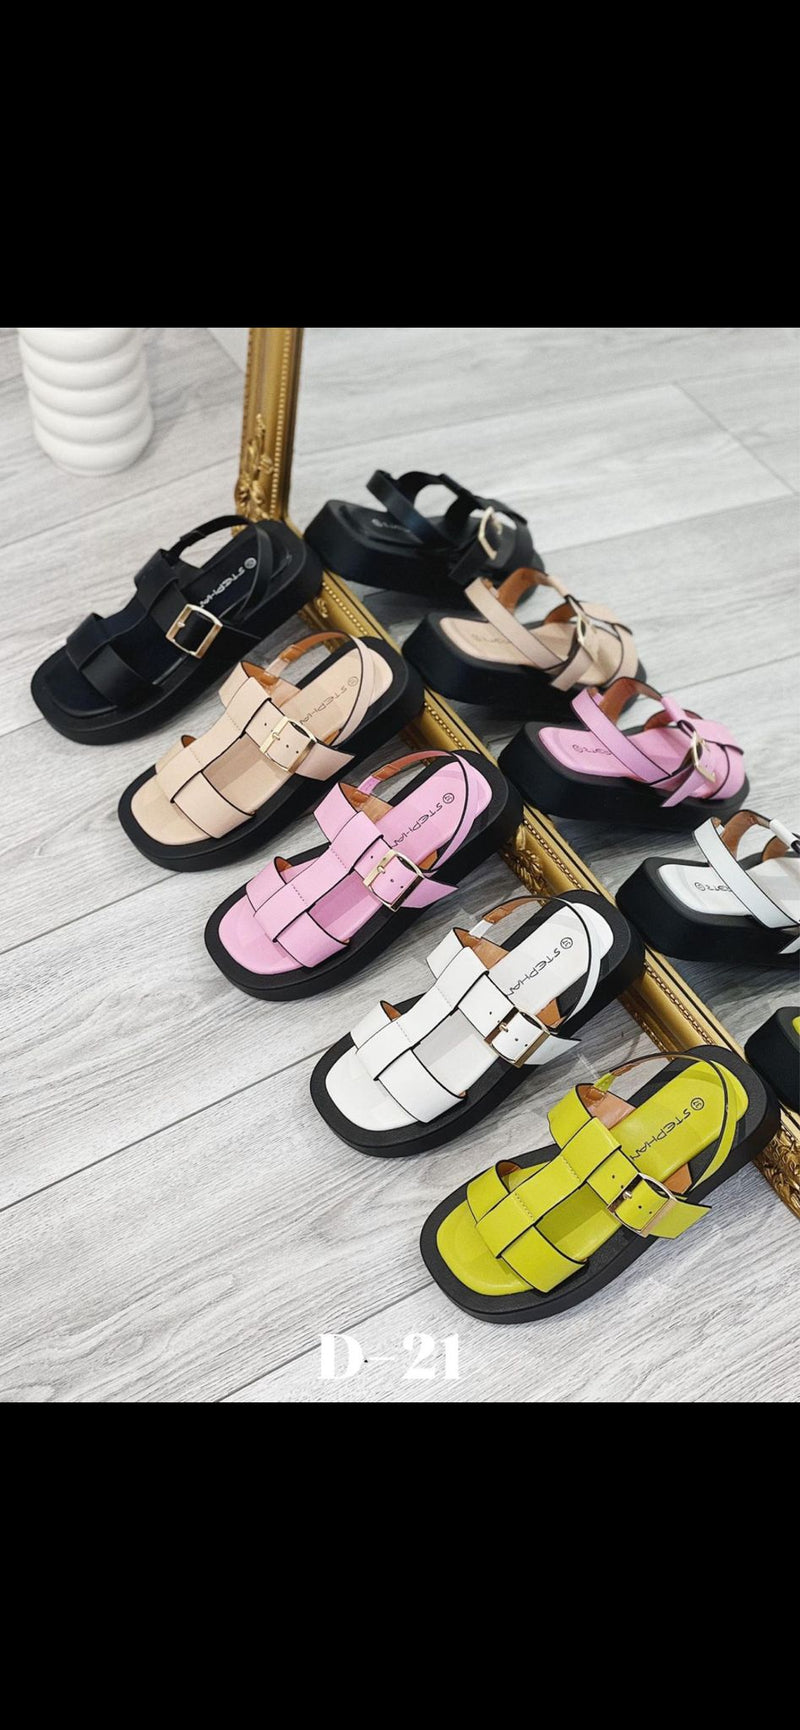 LUCY  pretty buckle sandals